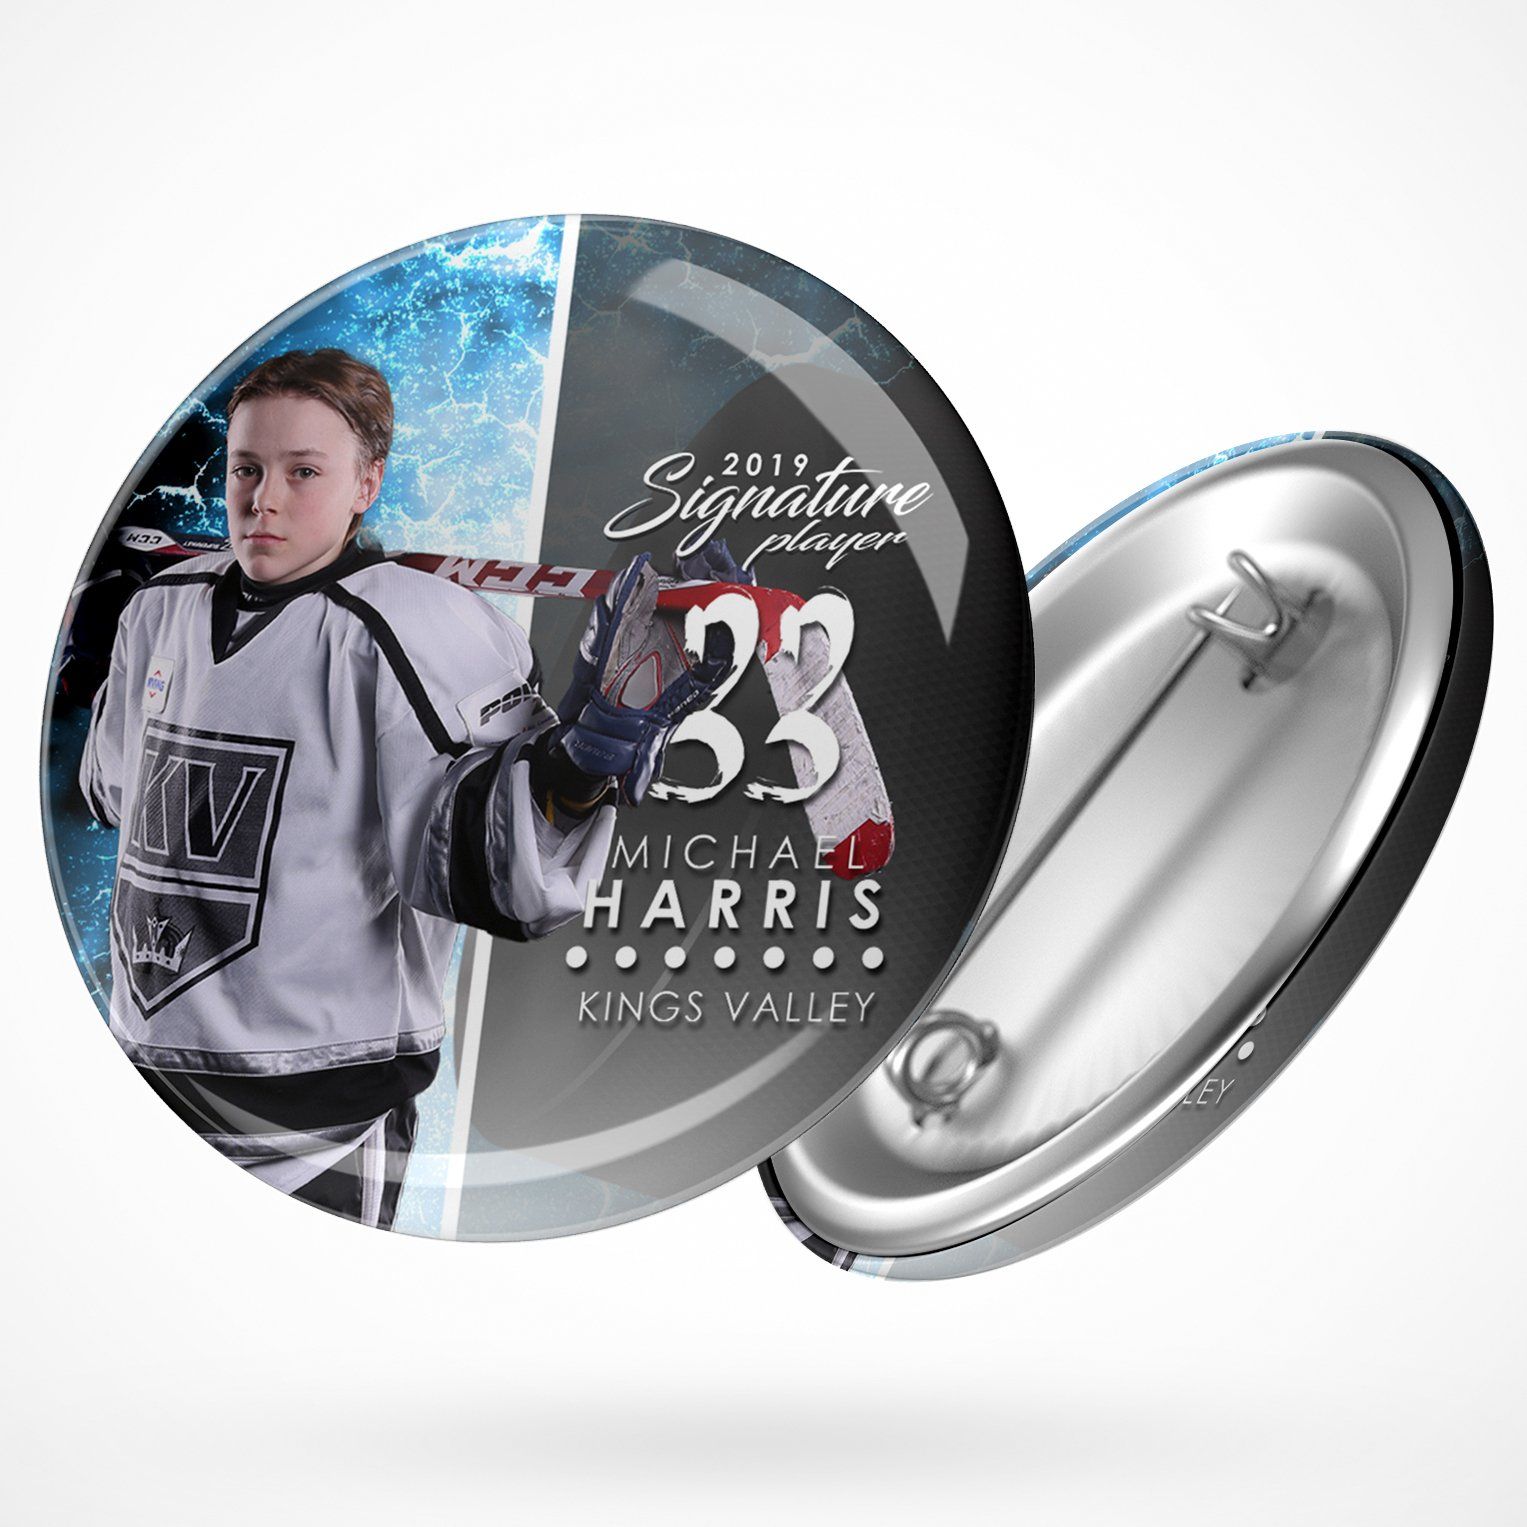 Signature Player - Hockey - V1 - Extraction Button Template-Photoshop Template - Photo Solutions